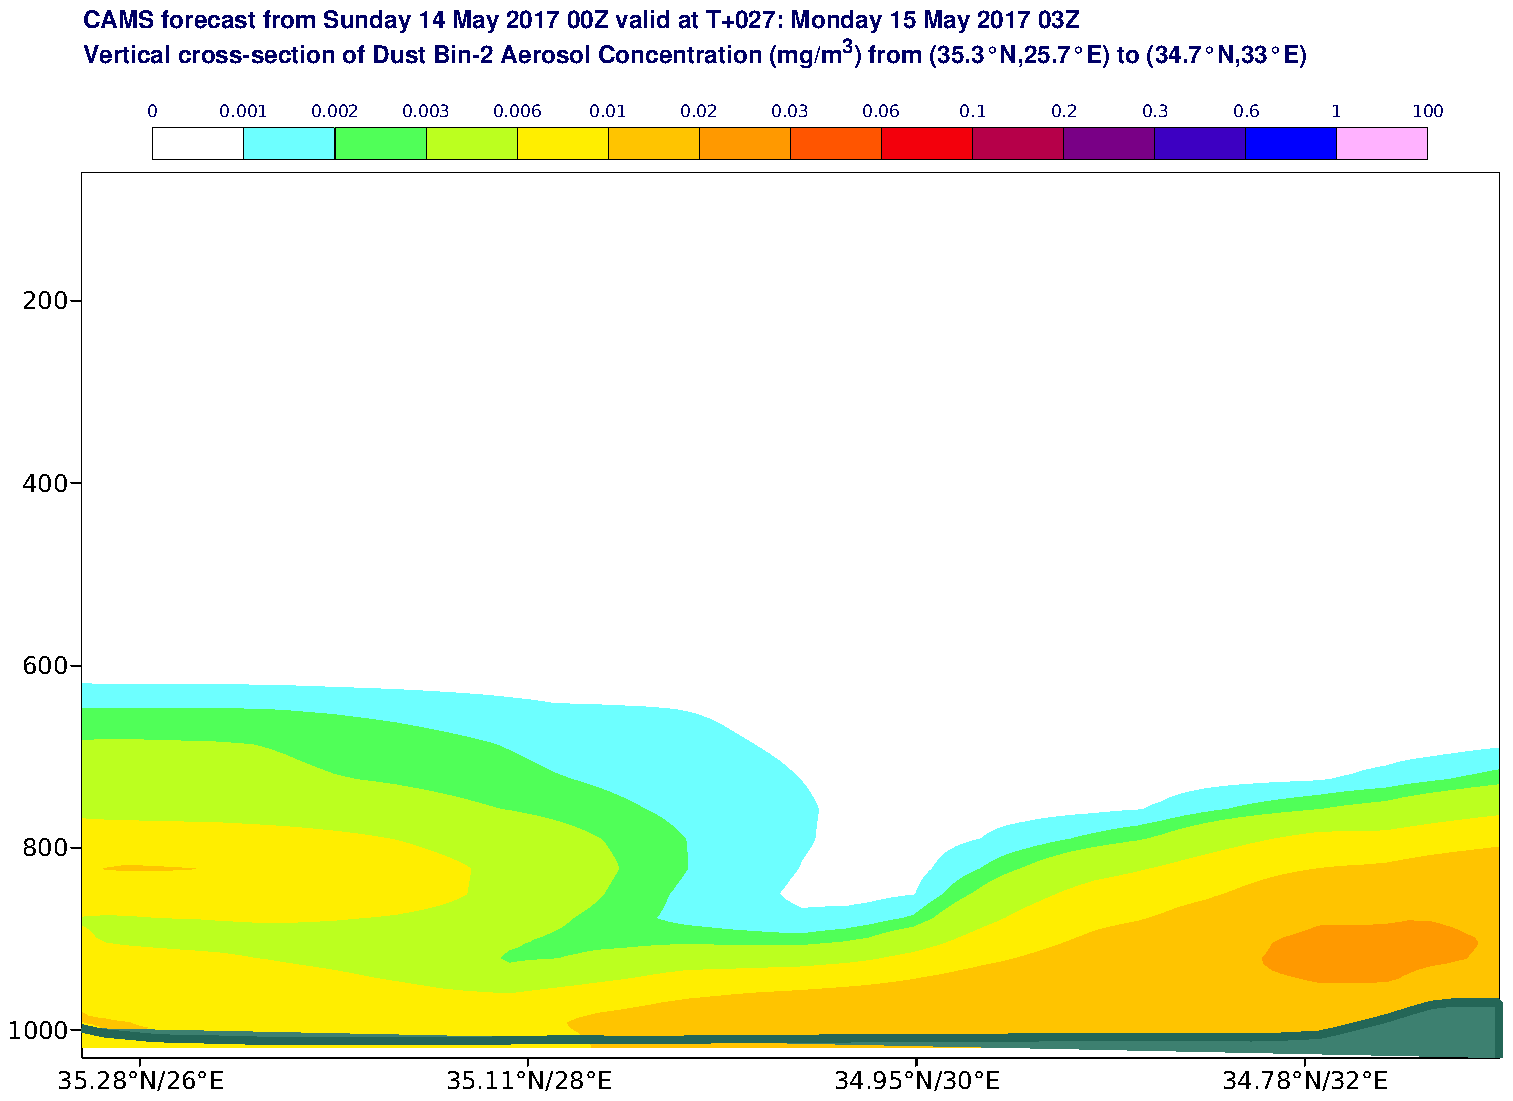 Vertical cross-section of Dust Bin-2 Aerosol Concentration (mg/m3) valid at T27 - 2017-05-15 03:00